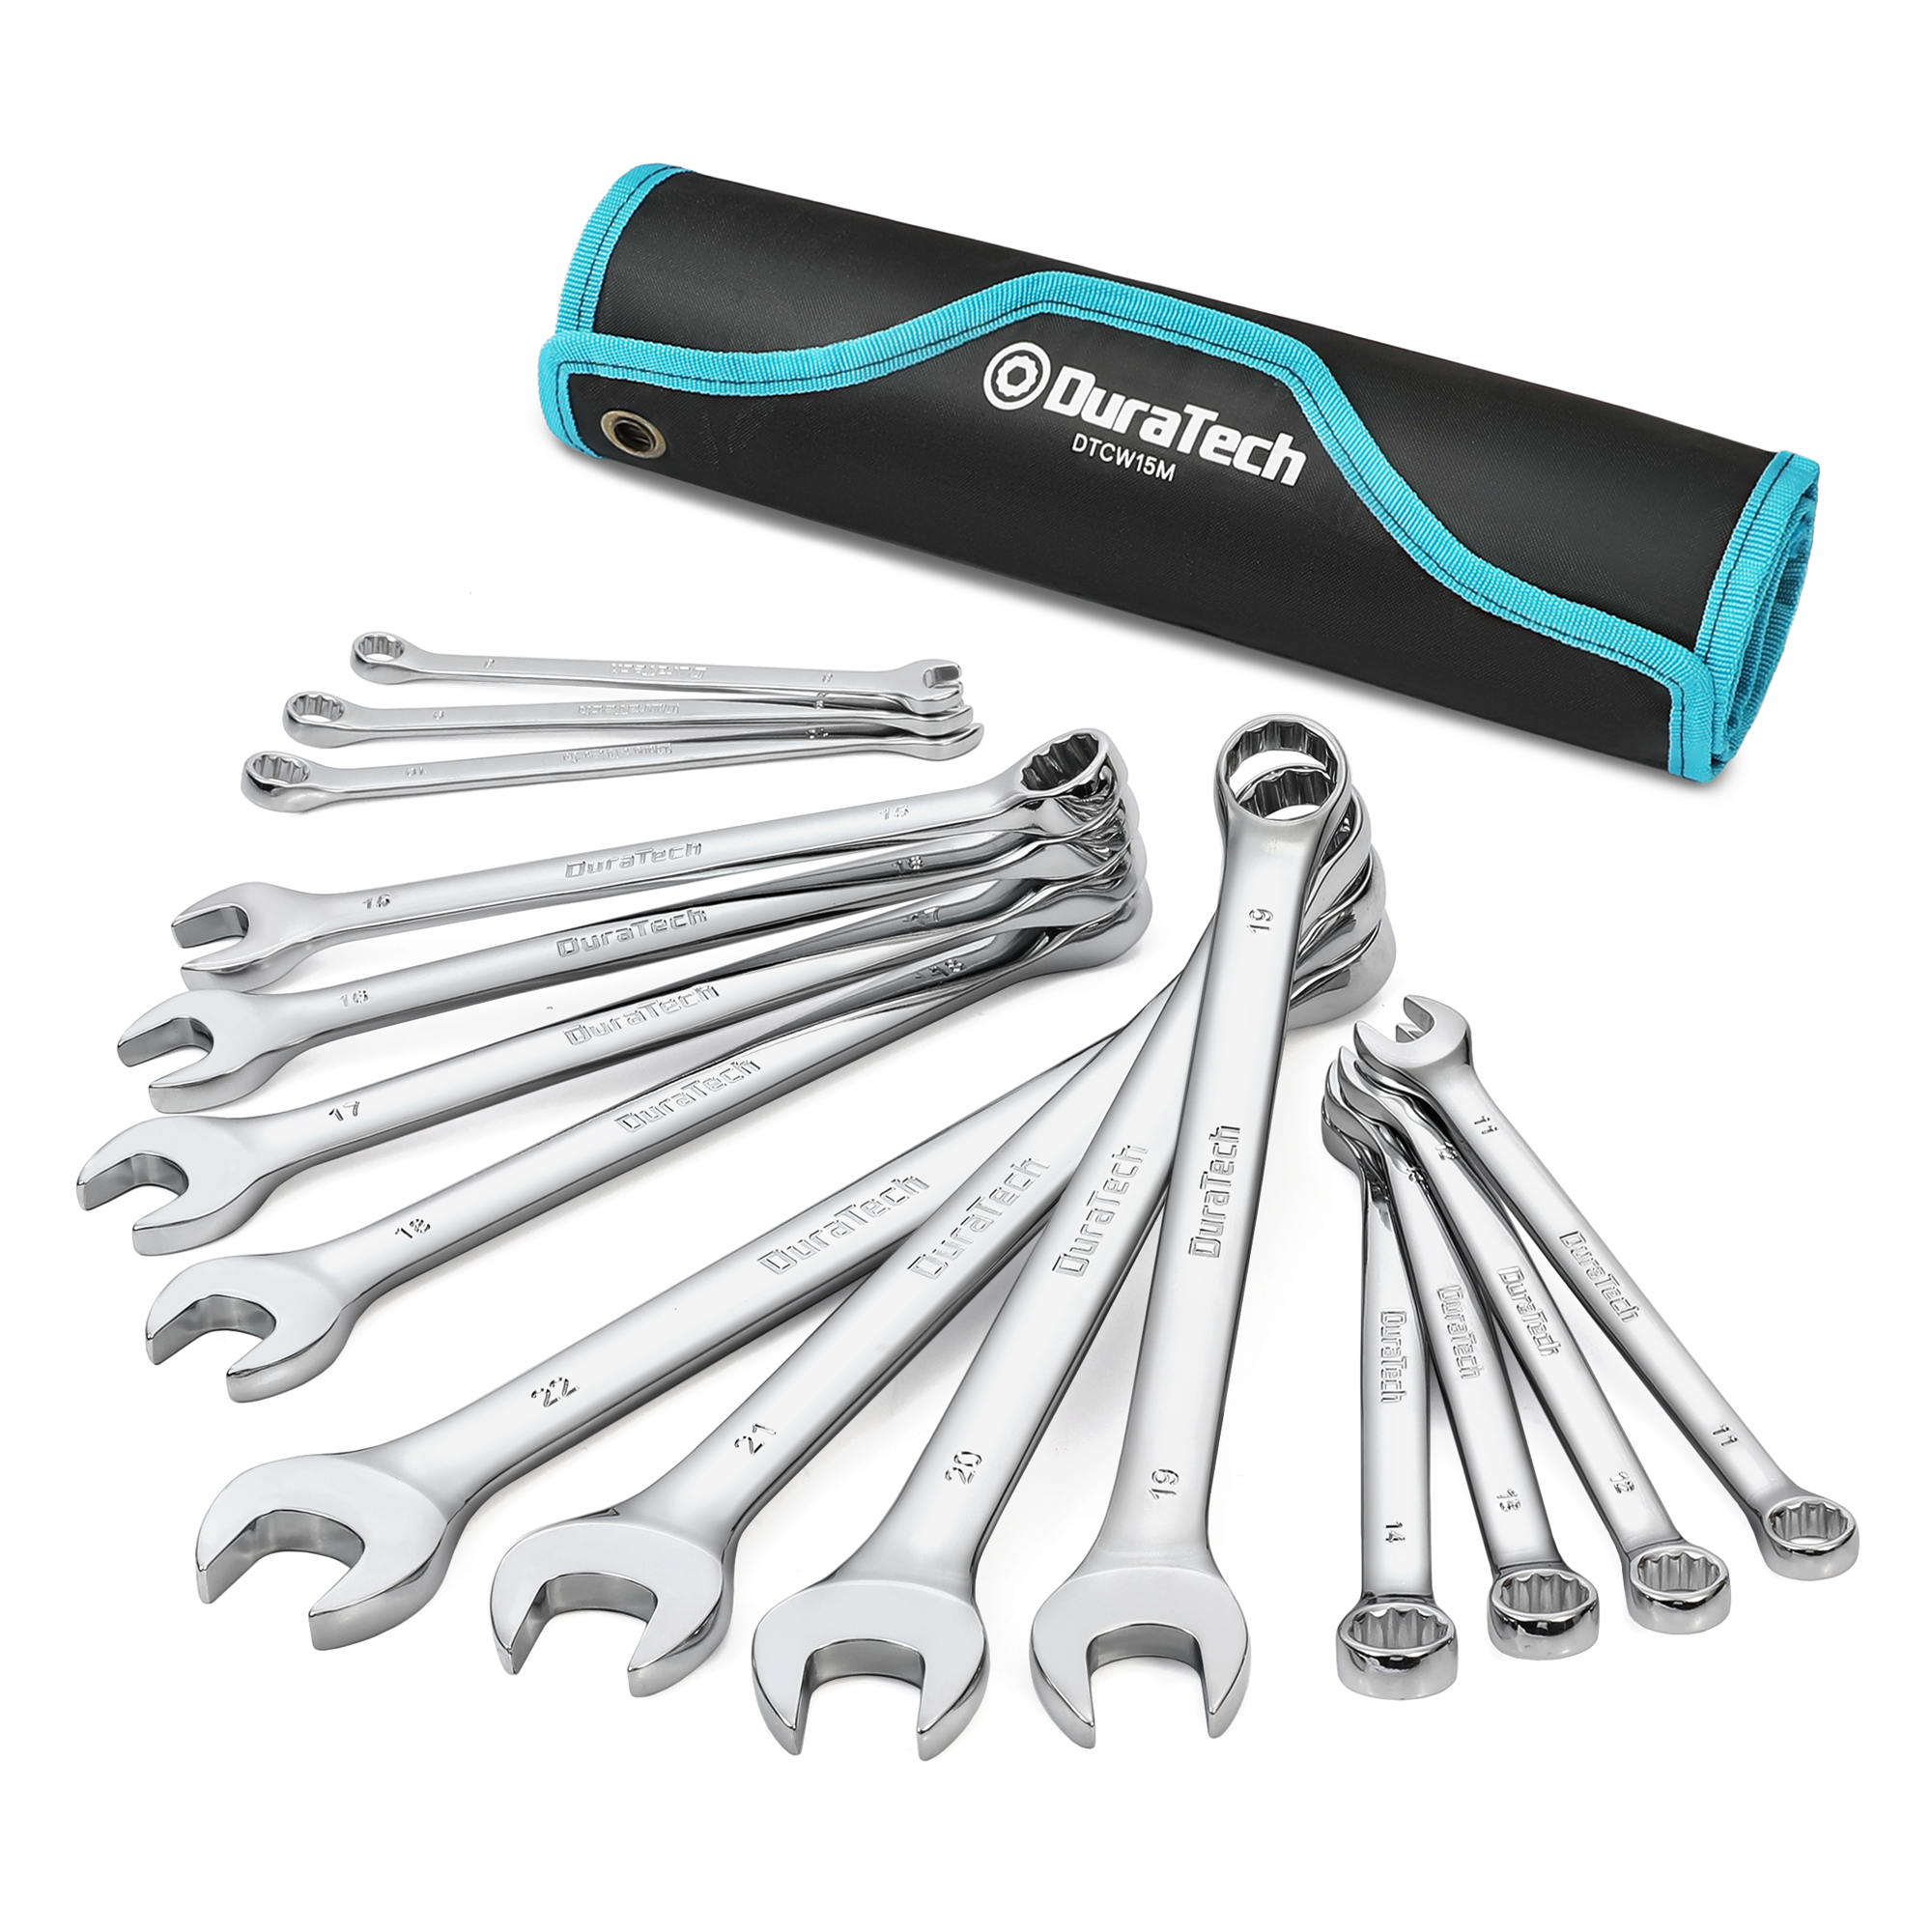 Combination Wrench Set, Metric, 15-Piece